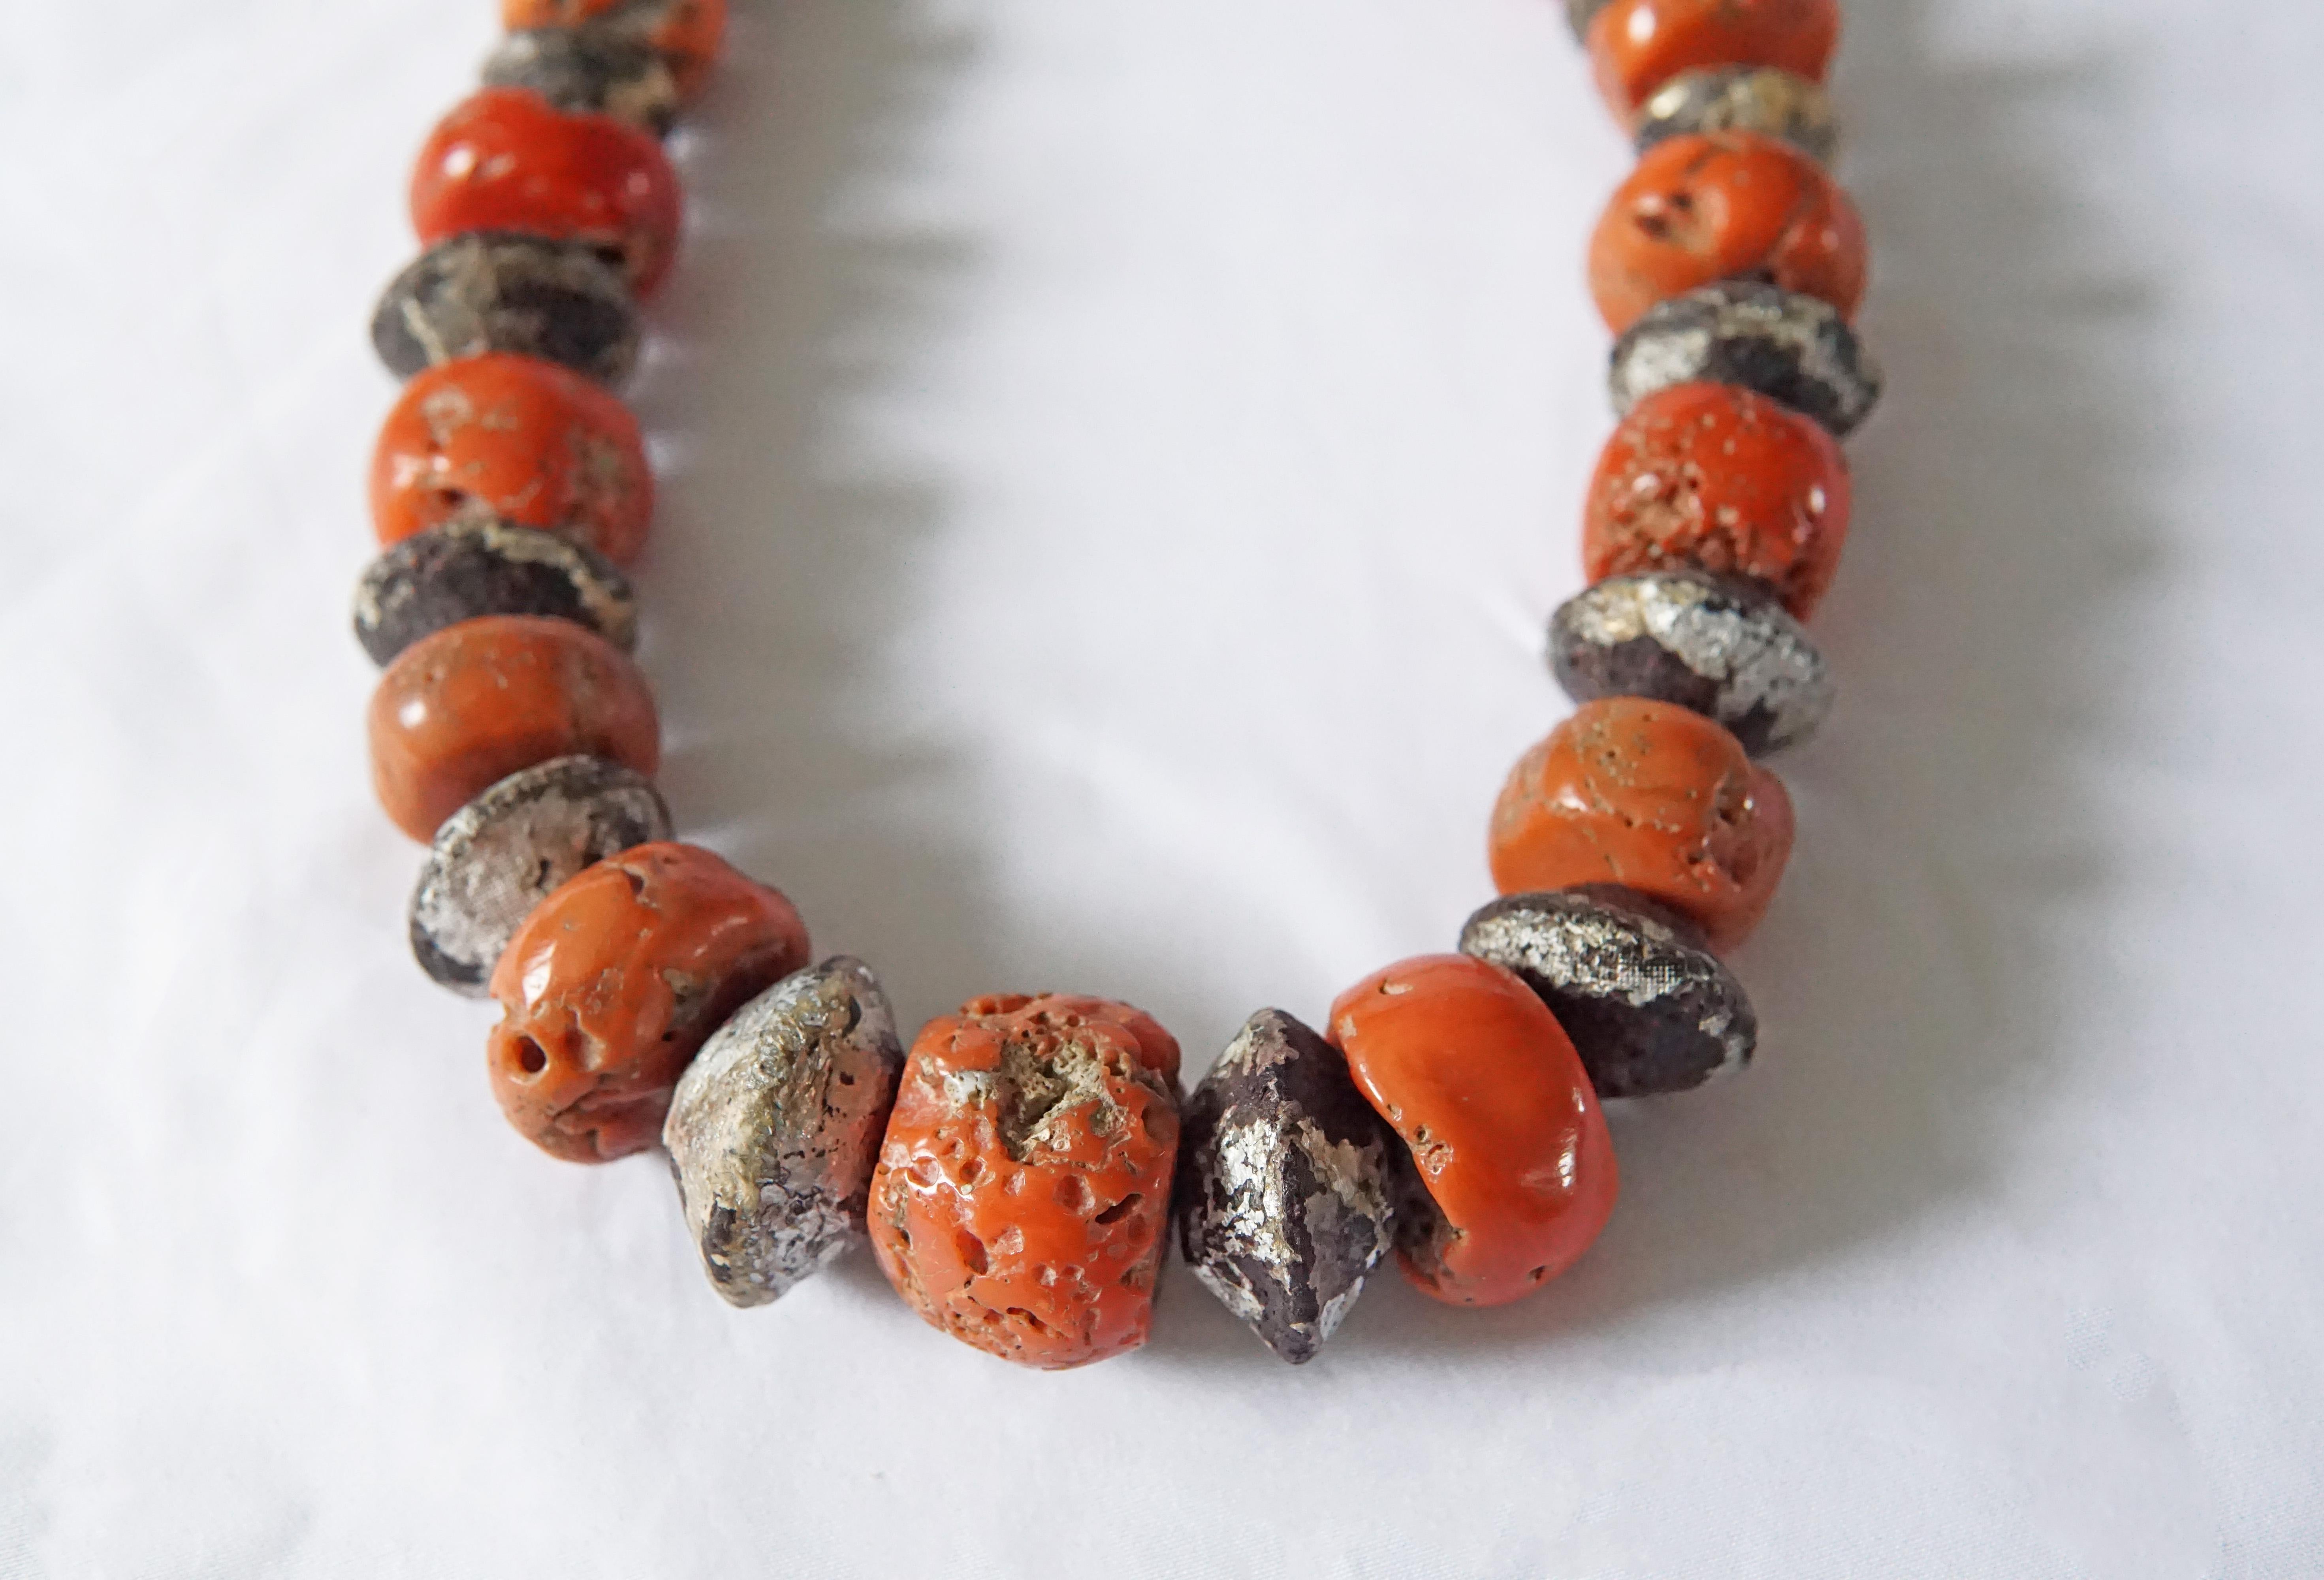 A wonderful example of a Tibetan Coral Bead mala / neckpiece with a stunning mix of orange & red colours that have aged beautifully over the decades. Tibetans believe that coral holds great power for the wearer both spiritually as well as